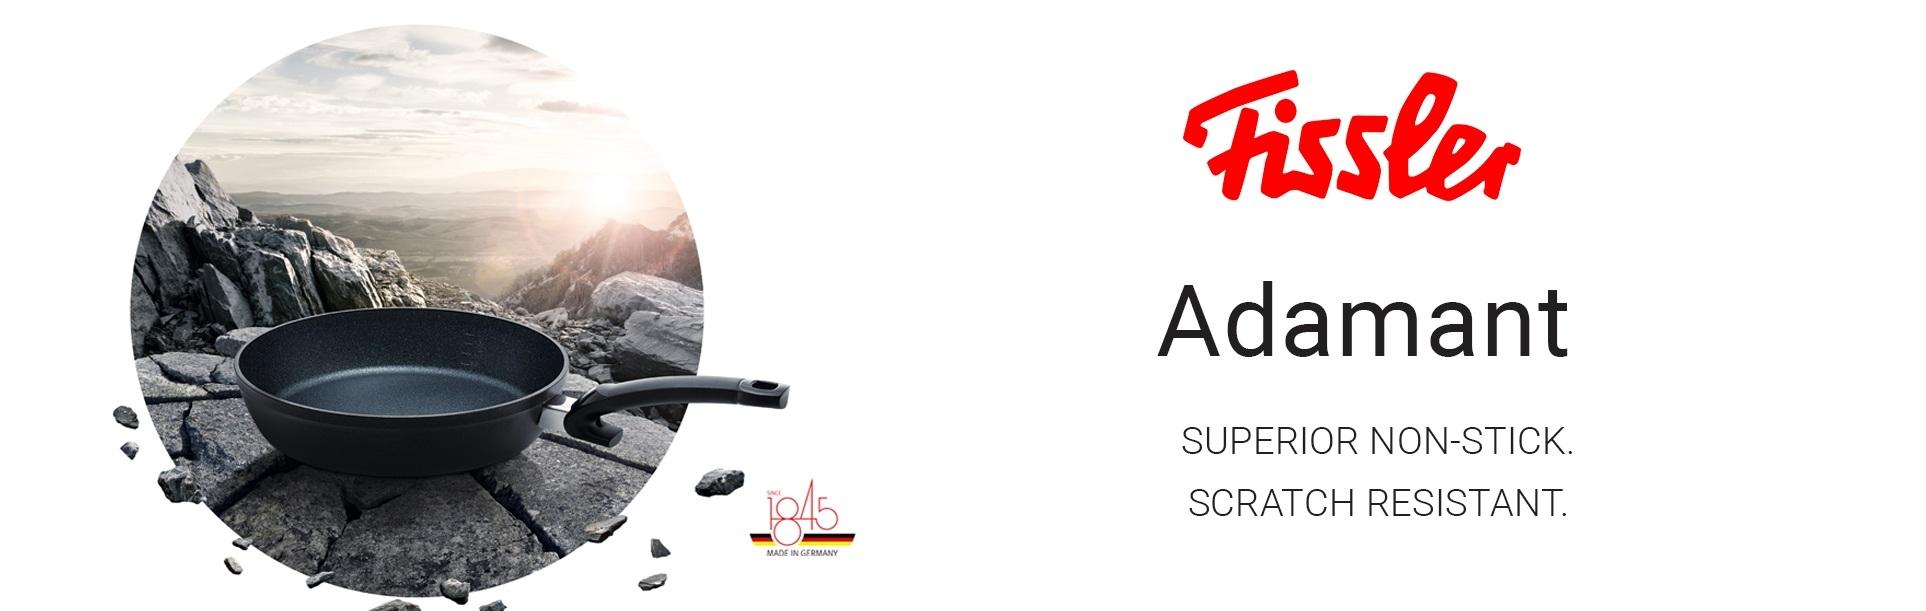 Fissler lifestyle products slide 2